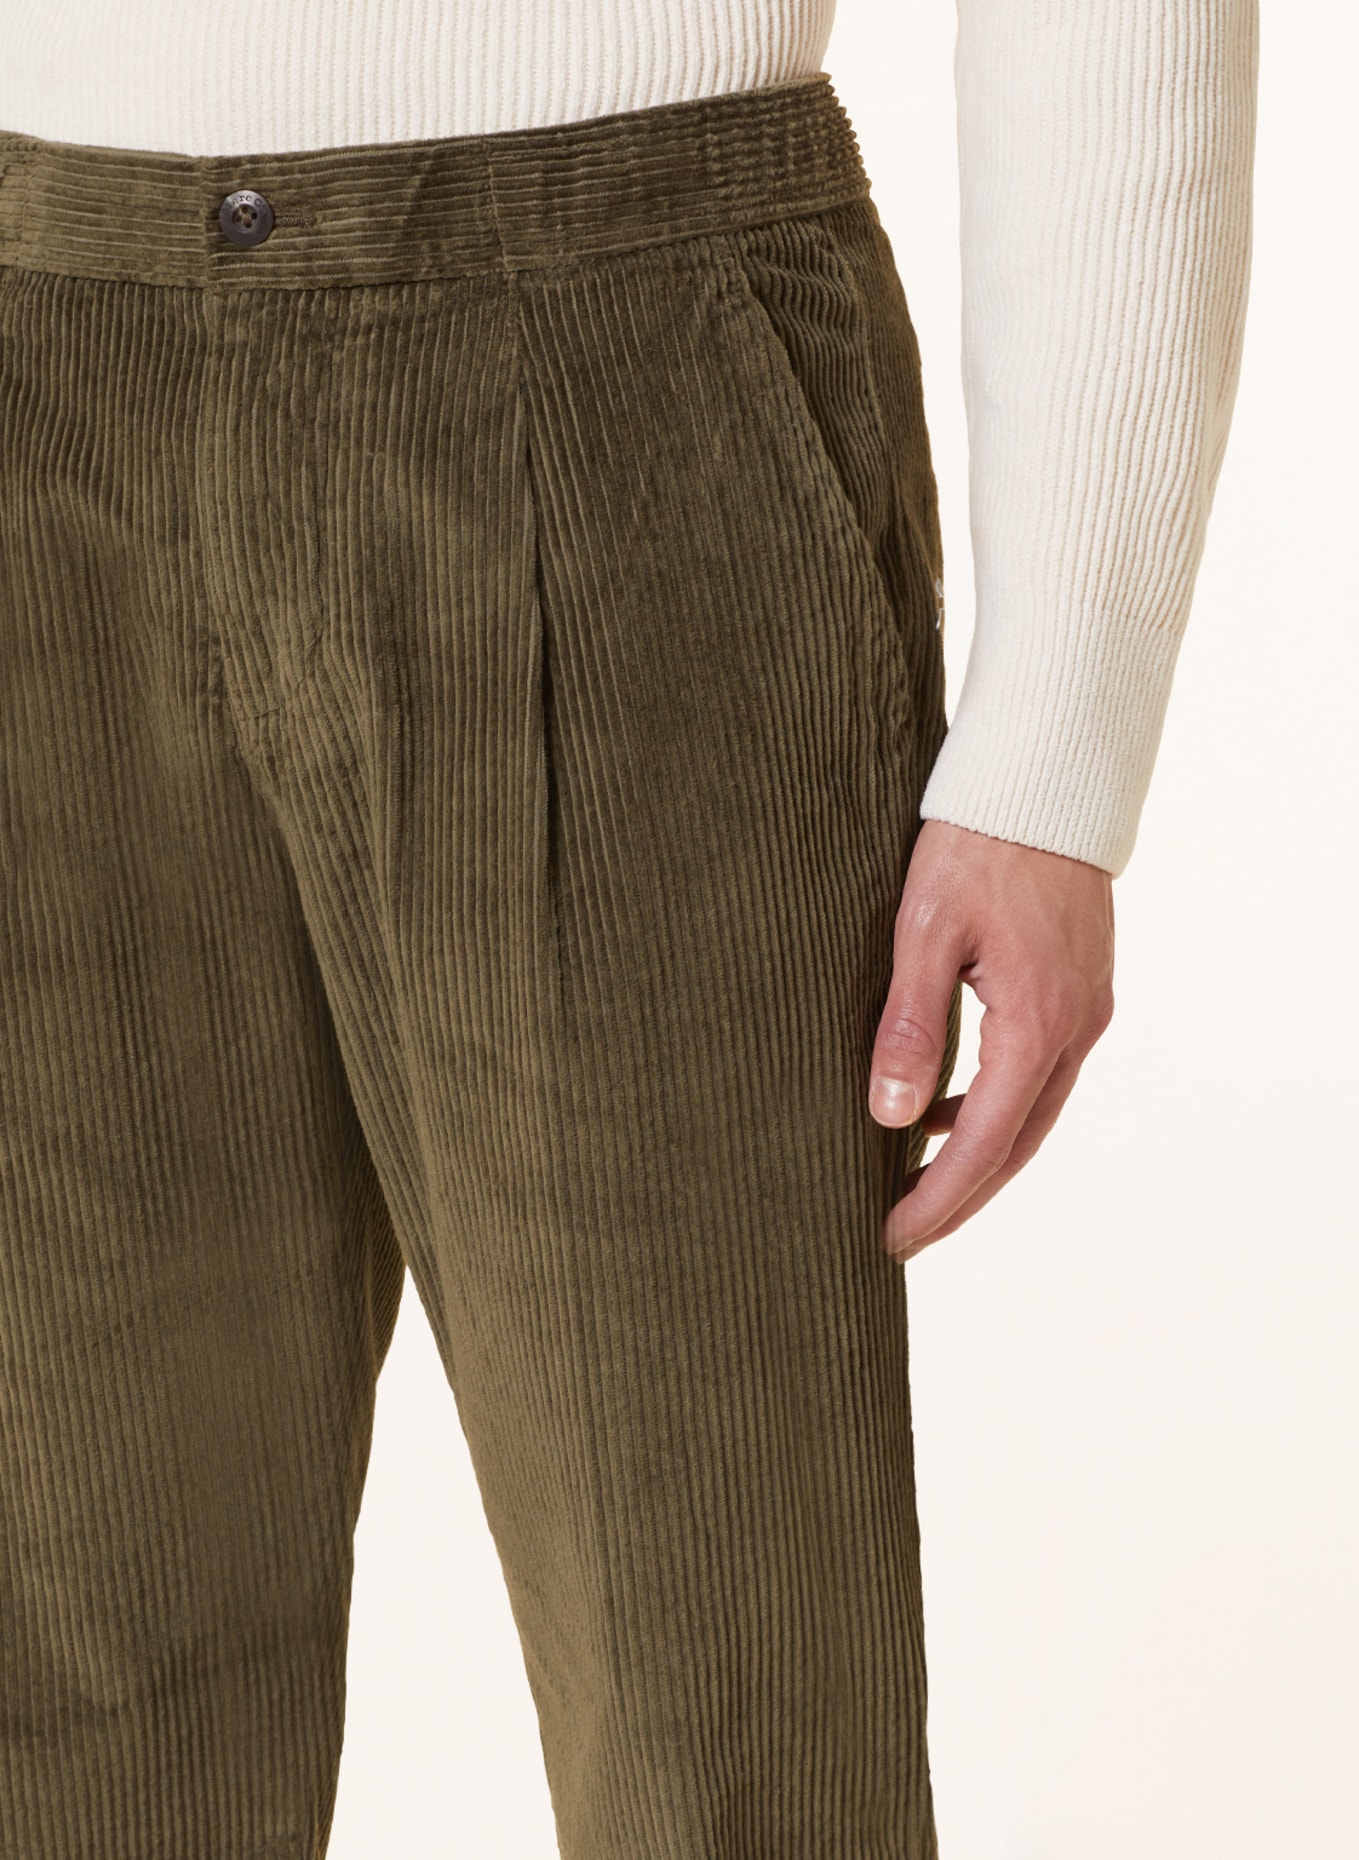 Corduroy pants model OSBY jogger tapered made of pure organic cotton - green, Corduroy trousers